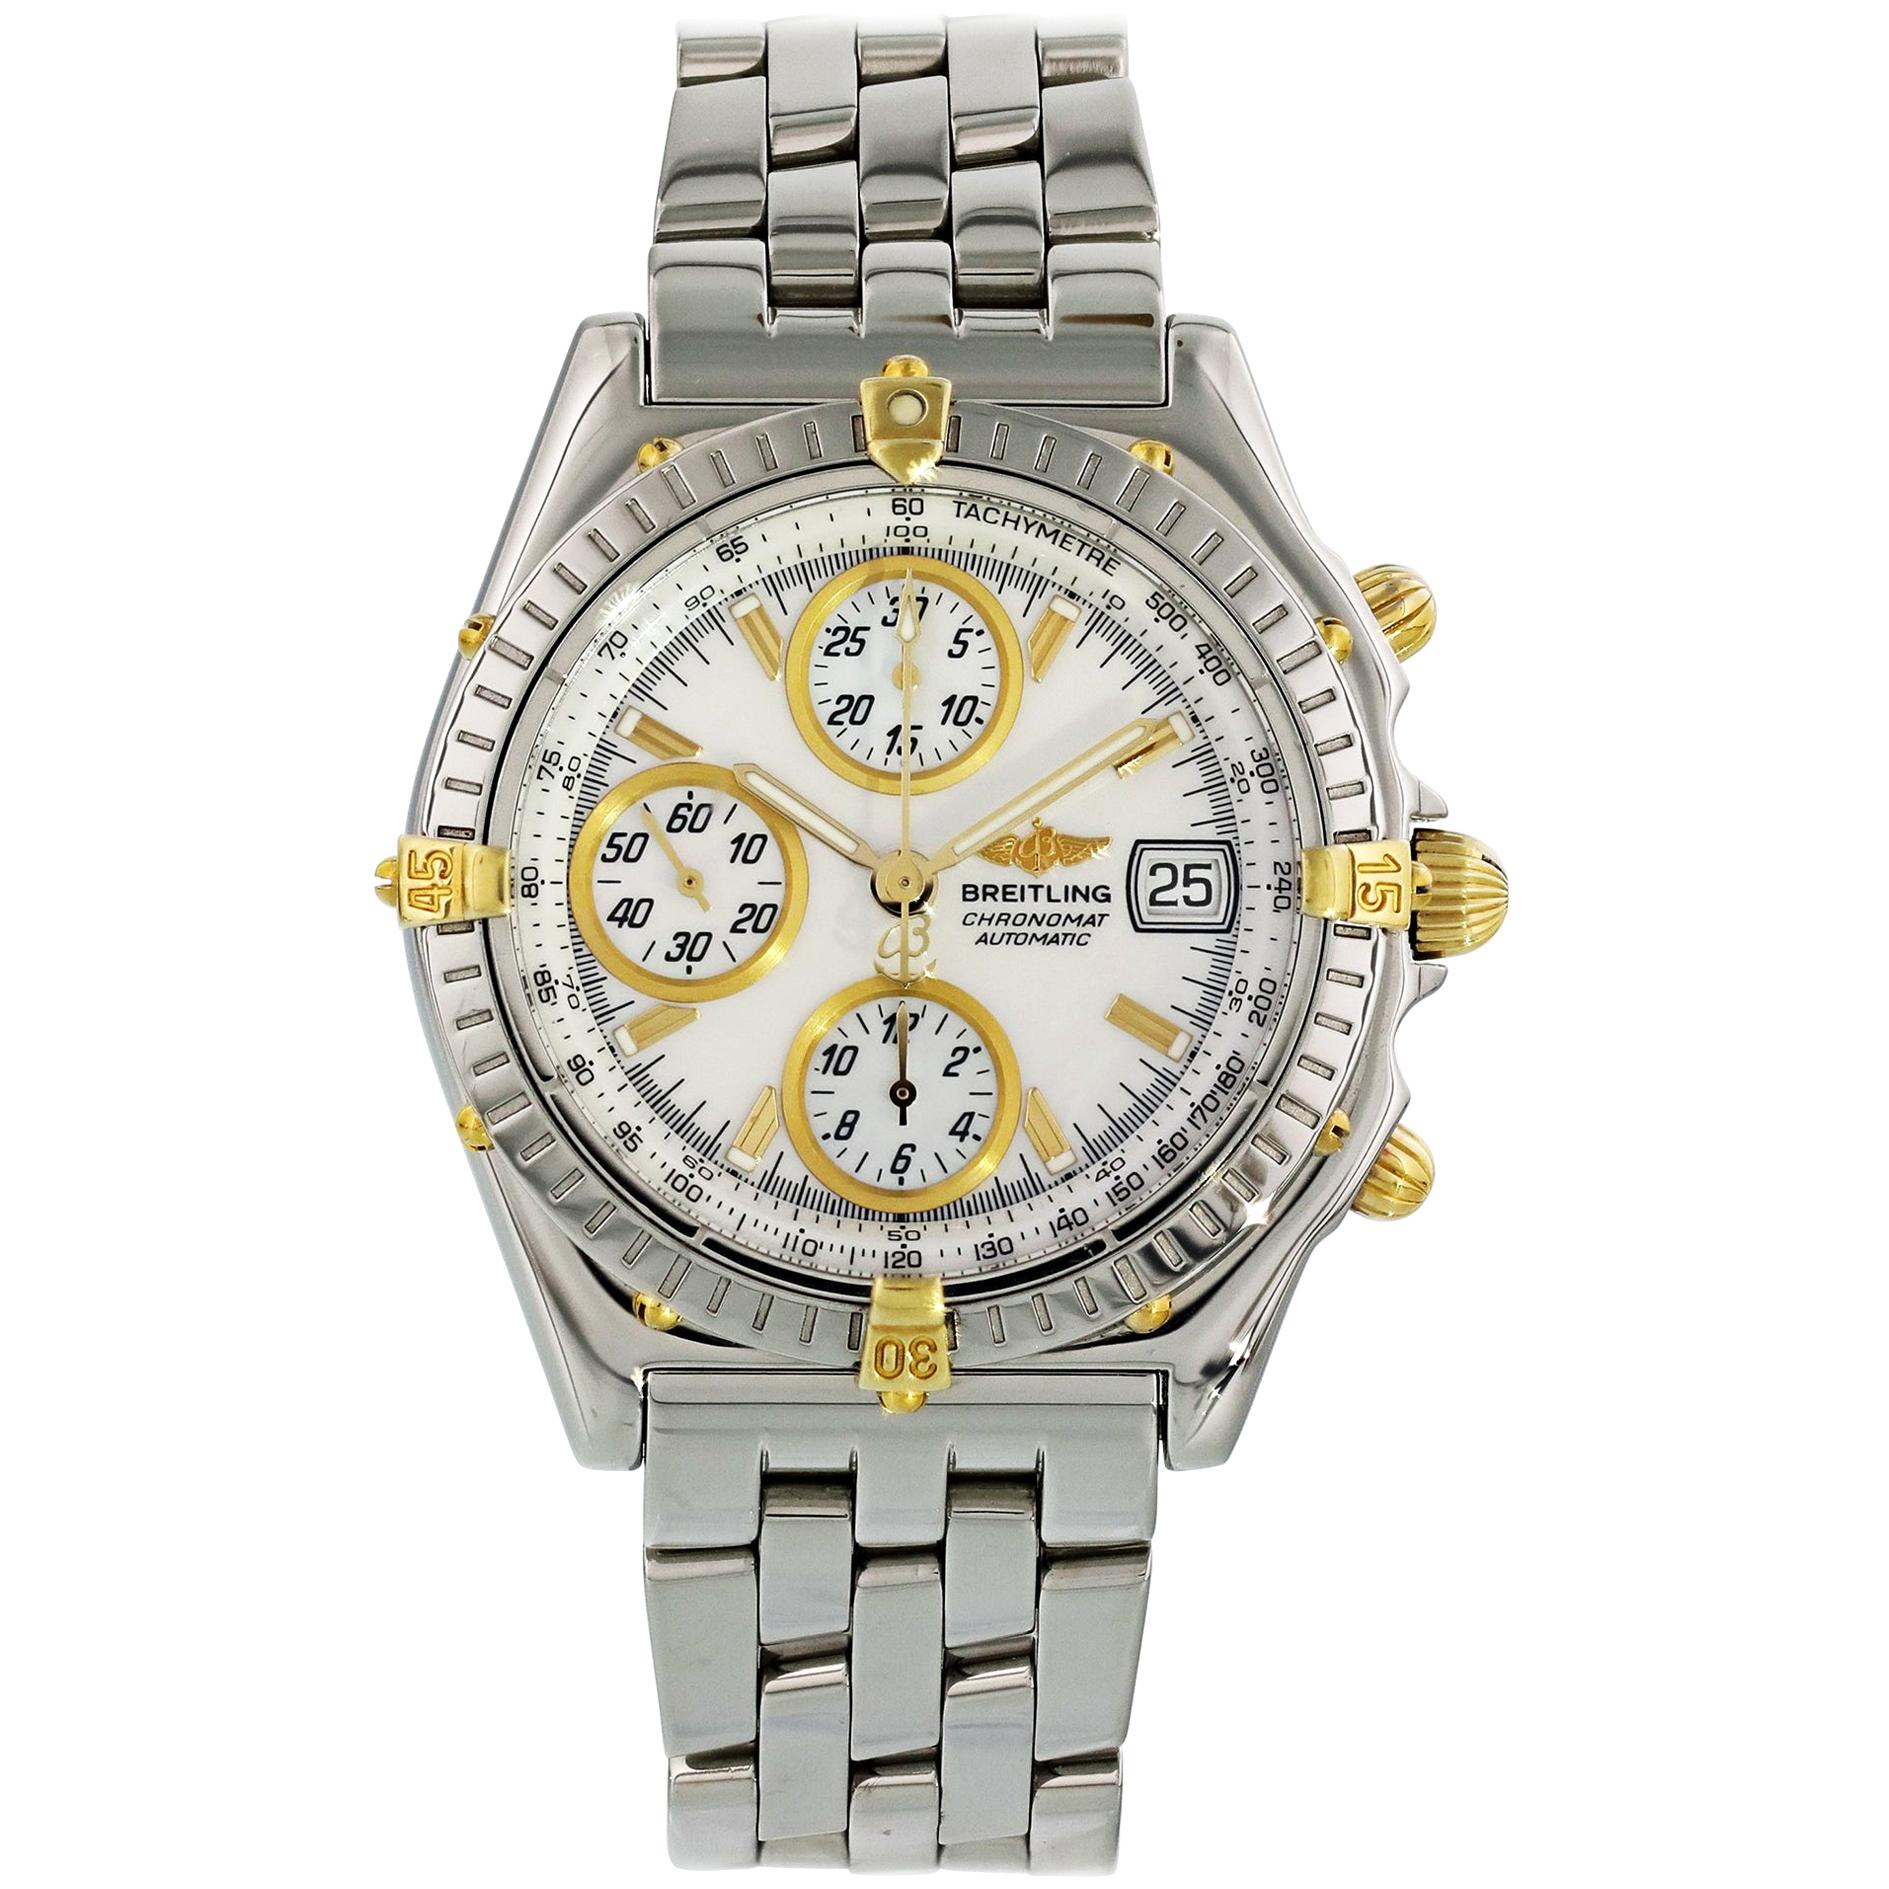 Breitling Chronomat B13050.1 Mother of Pearl Dial Men's Watch For Sale